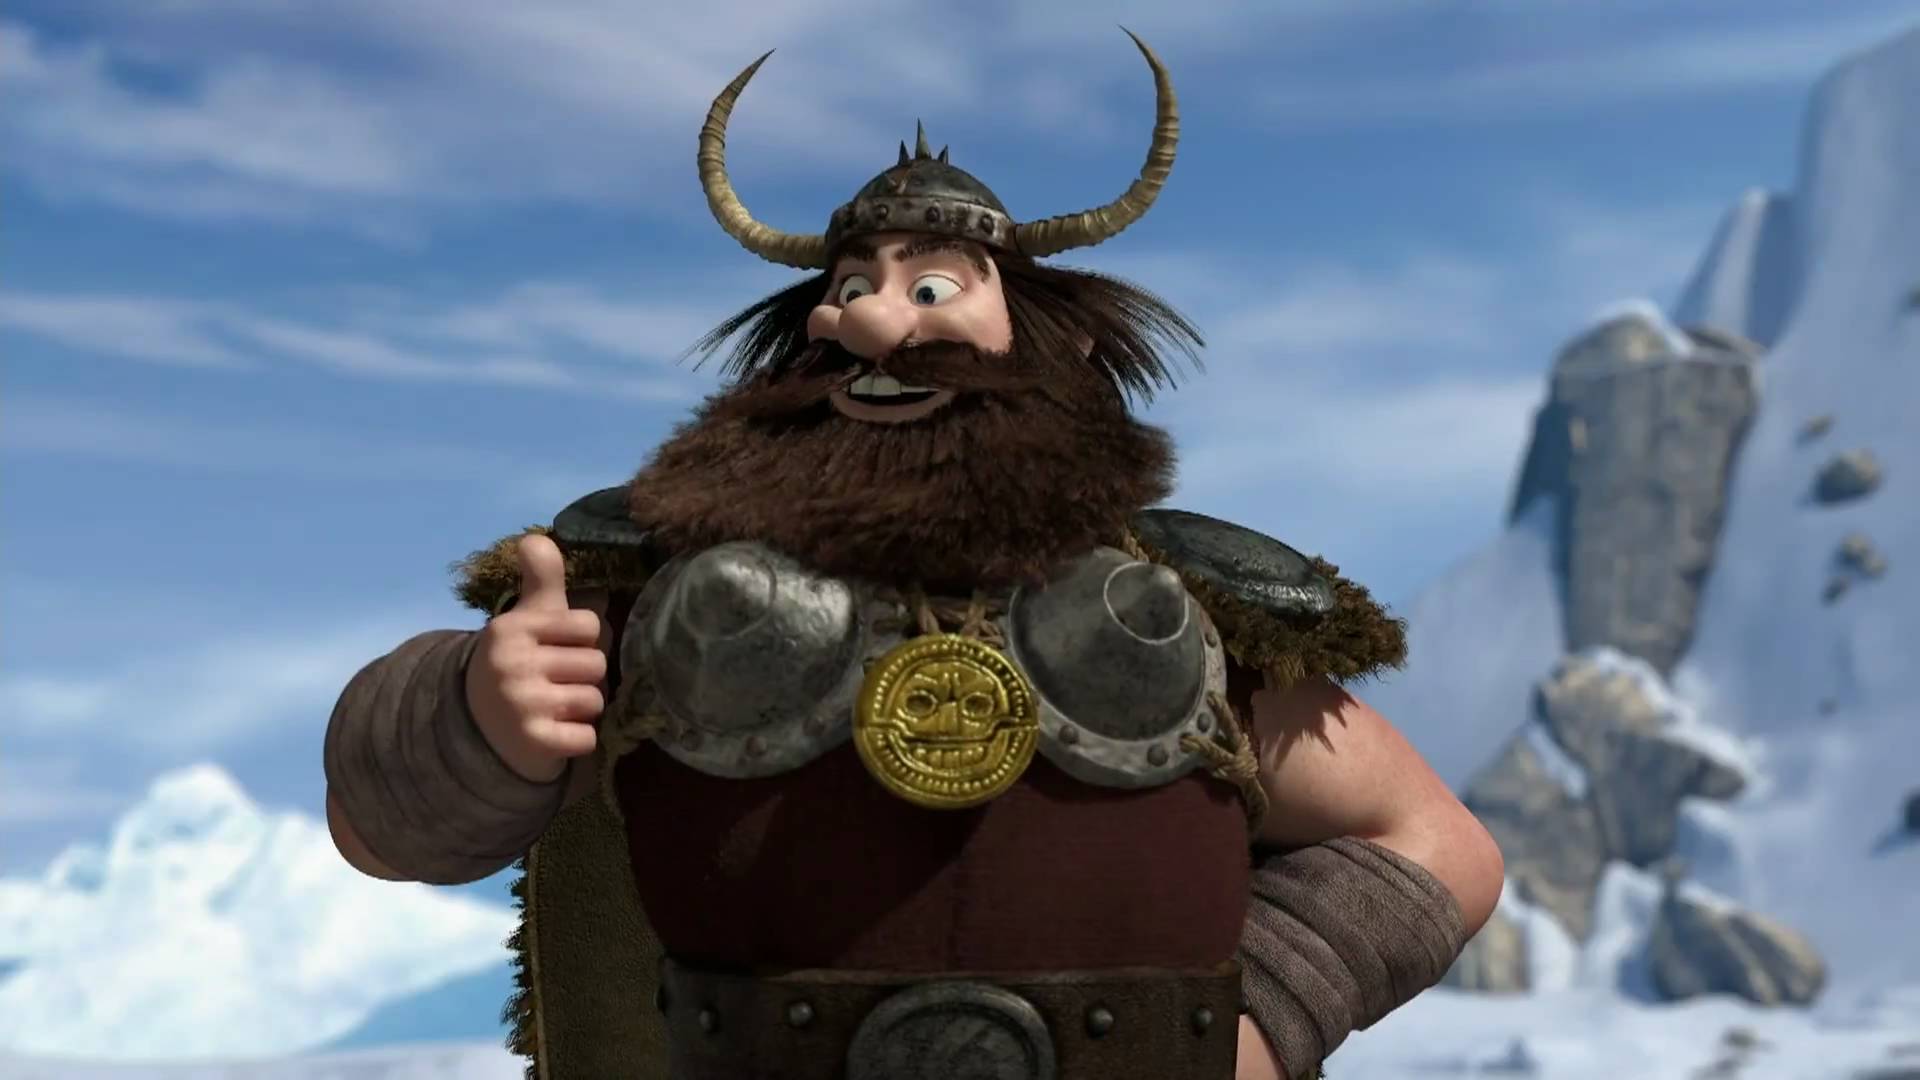 HOW TO TRAIN YOUR DRAGON - Dragon-Viking Games Vignettes: Bobsled ...